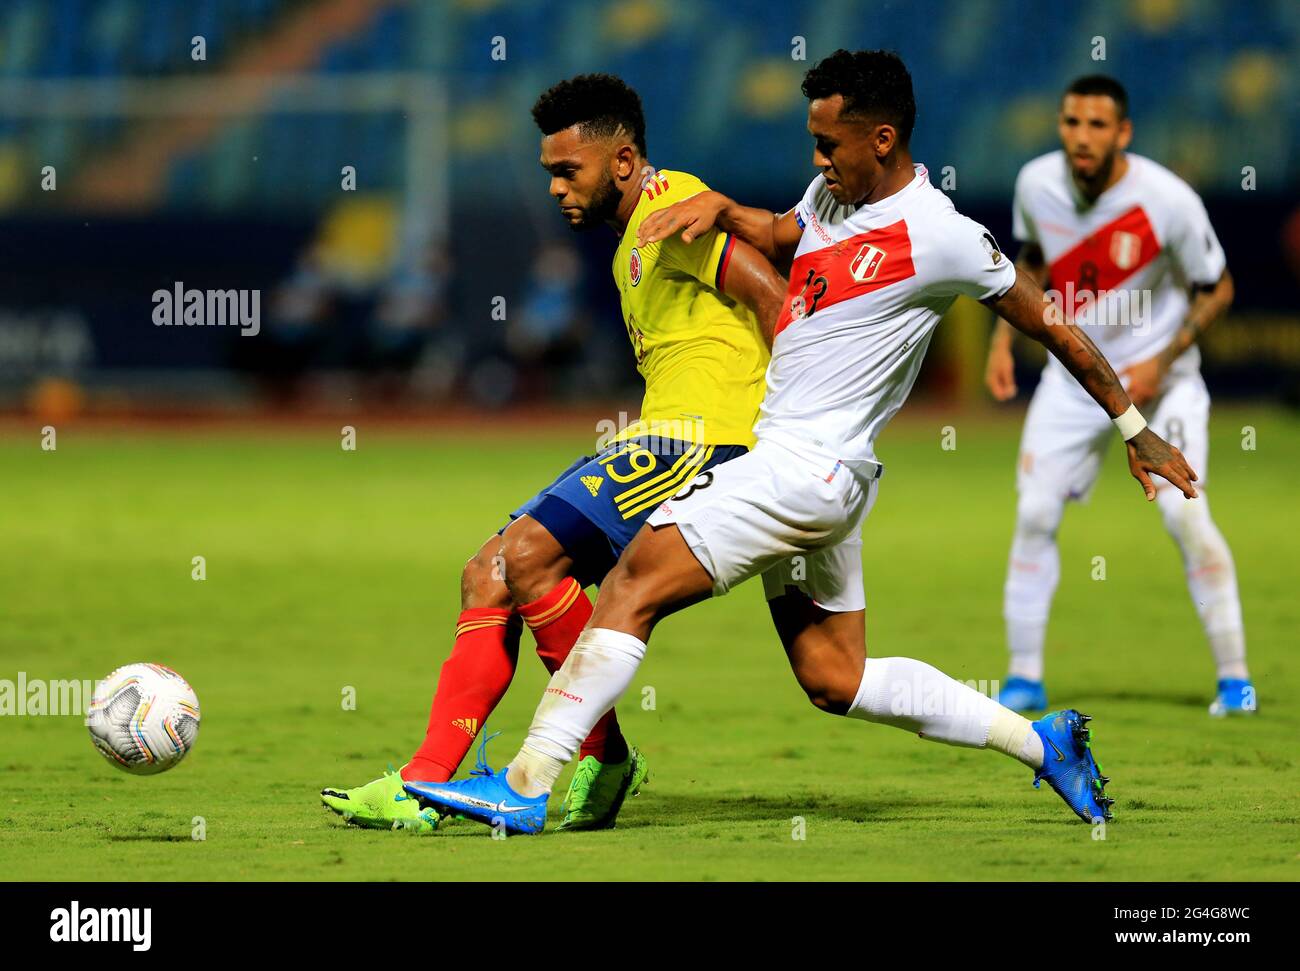 GOIANIA, BRAZIL - JUNE 20: Miguel Borja of Colombia competes for the ball with Renato Tapia of Peru ,during the match between Colombia and Peru as part of Conmebol Copa America Brazil 2021 at Estadio Olimpico on June 20, 2021 in Goiania, Brazil. (MB Media) Stock Photo